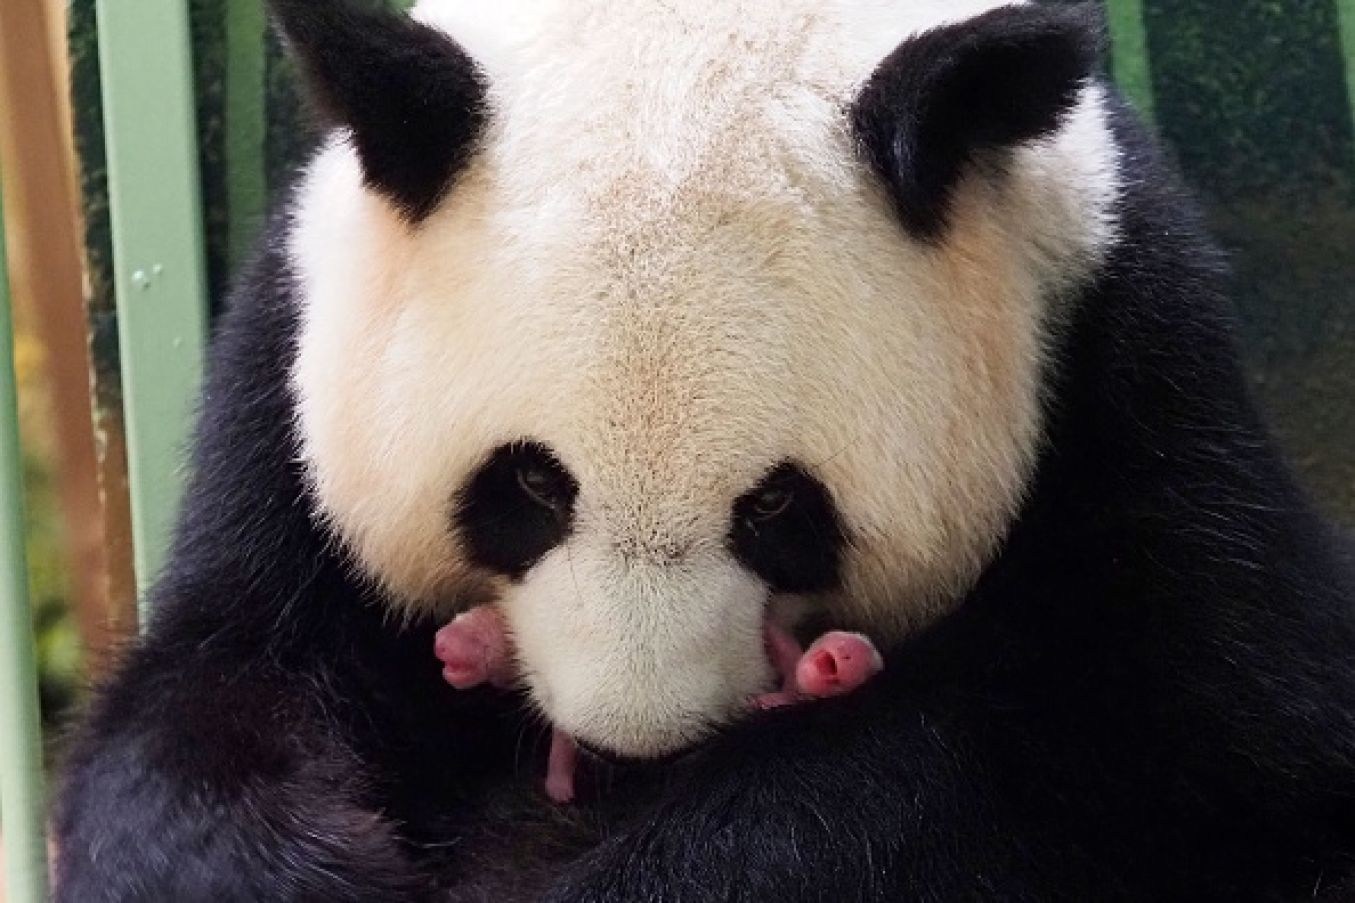 The Giant Panda Huan Huan And Her Twin Cubs At Beauval Zoo In France. Photo: Guillaume Souvant/Afp Via Getty Images